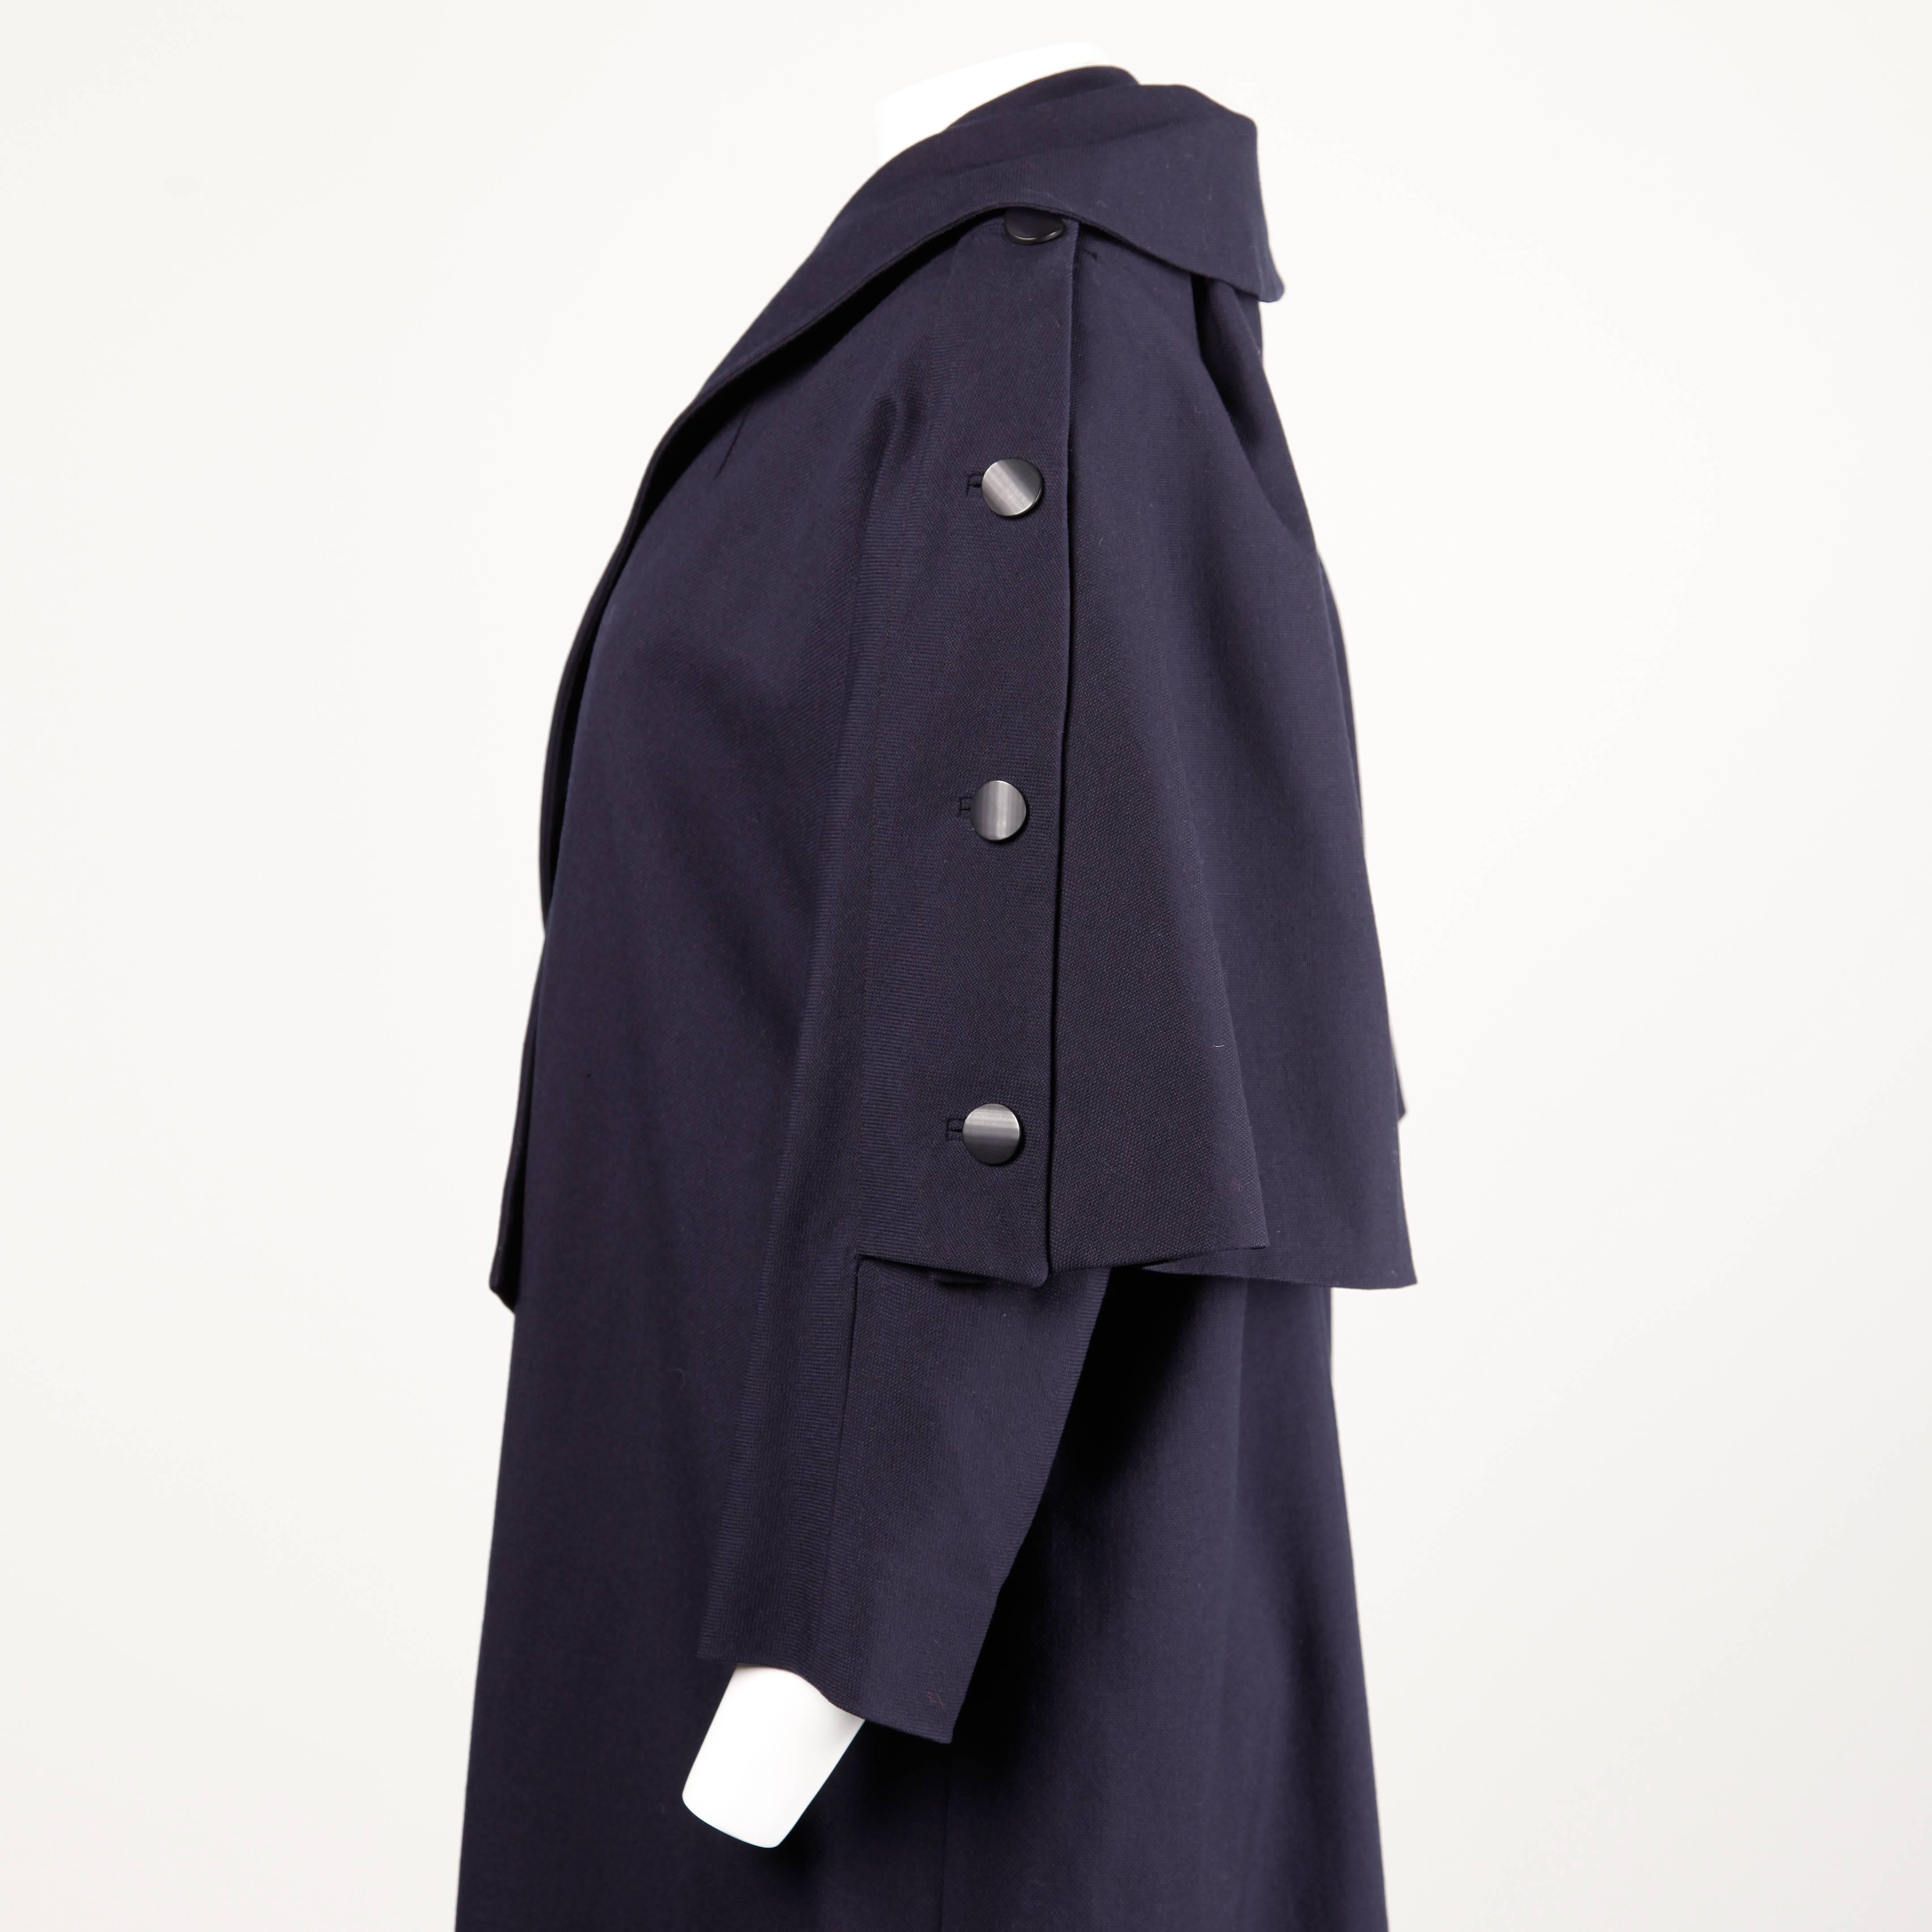 Stunning vintage 1950s coat by Jacques Heim in navy silk and wool. The coat has a unique cut with a back cape/ scarf piece that buttons on and off. Wear this coat different ways! Beautiful construction with hand stitched detailing throughout, bound